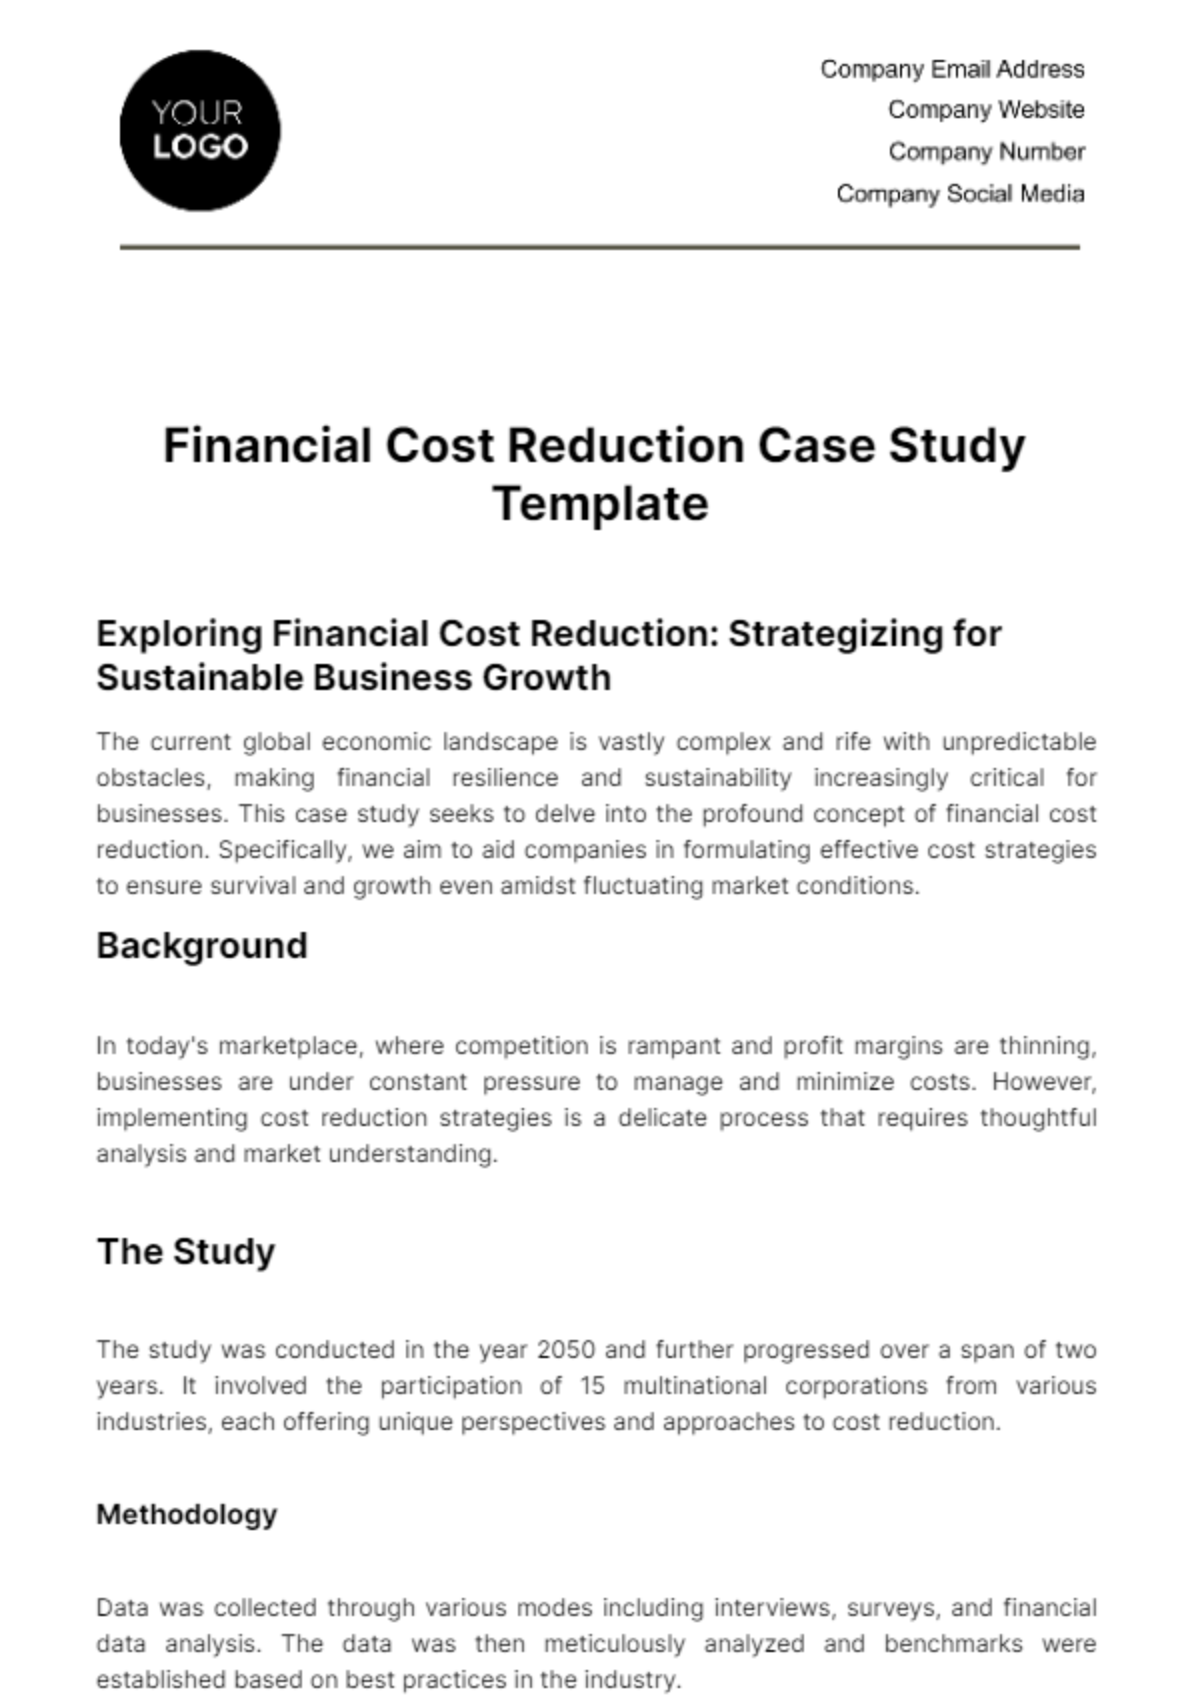 Financial Cost Reduction Case Study Template